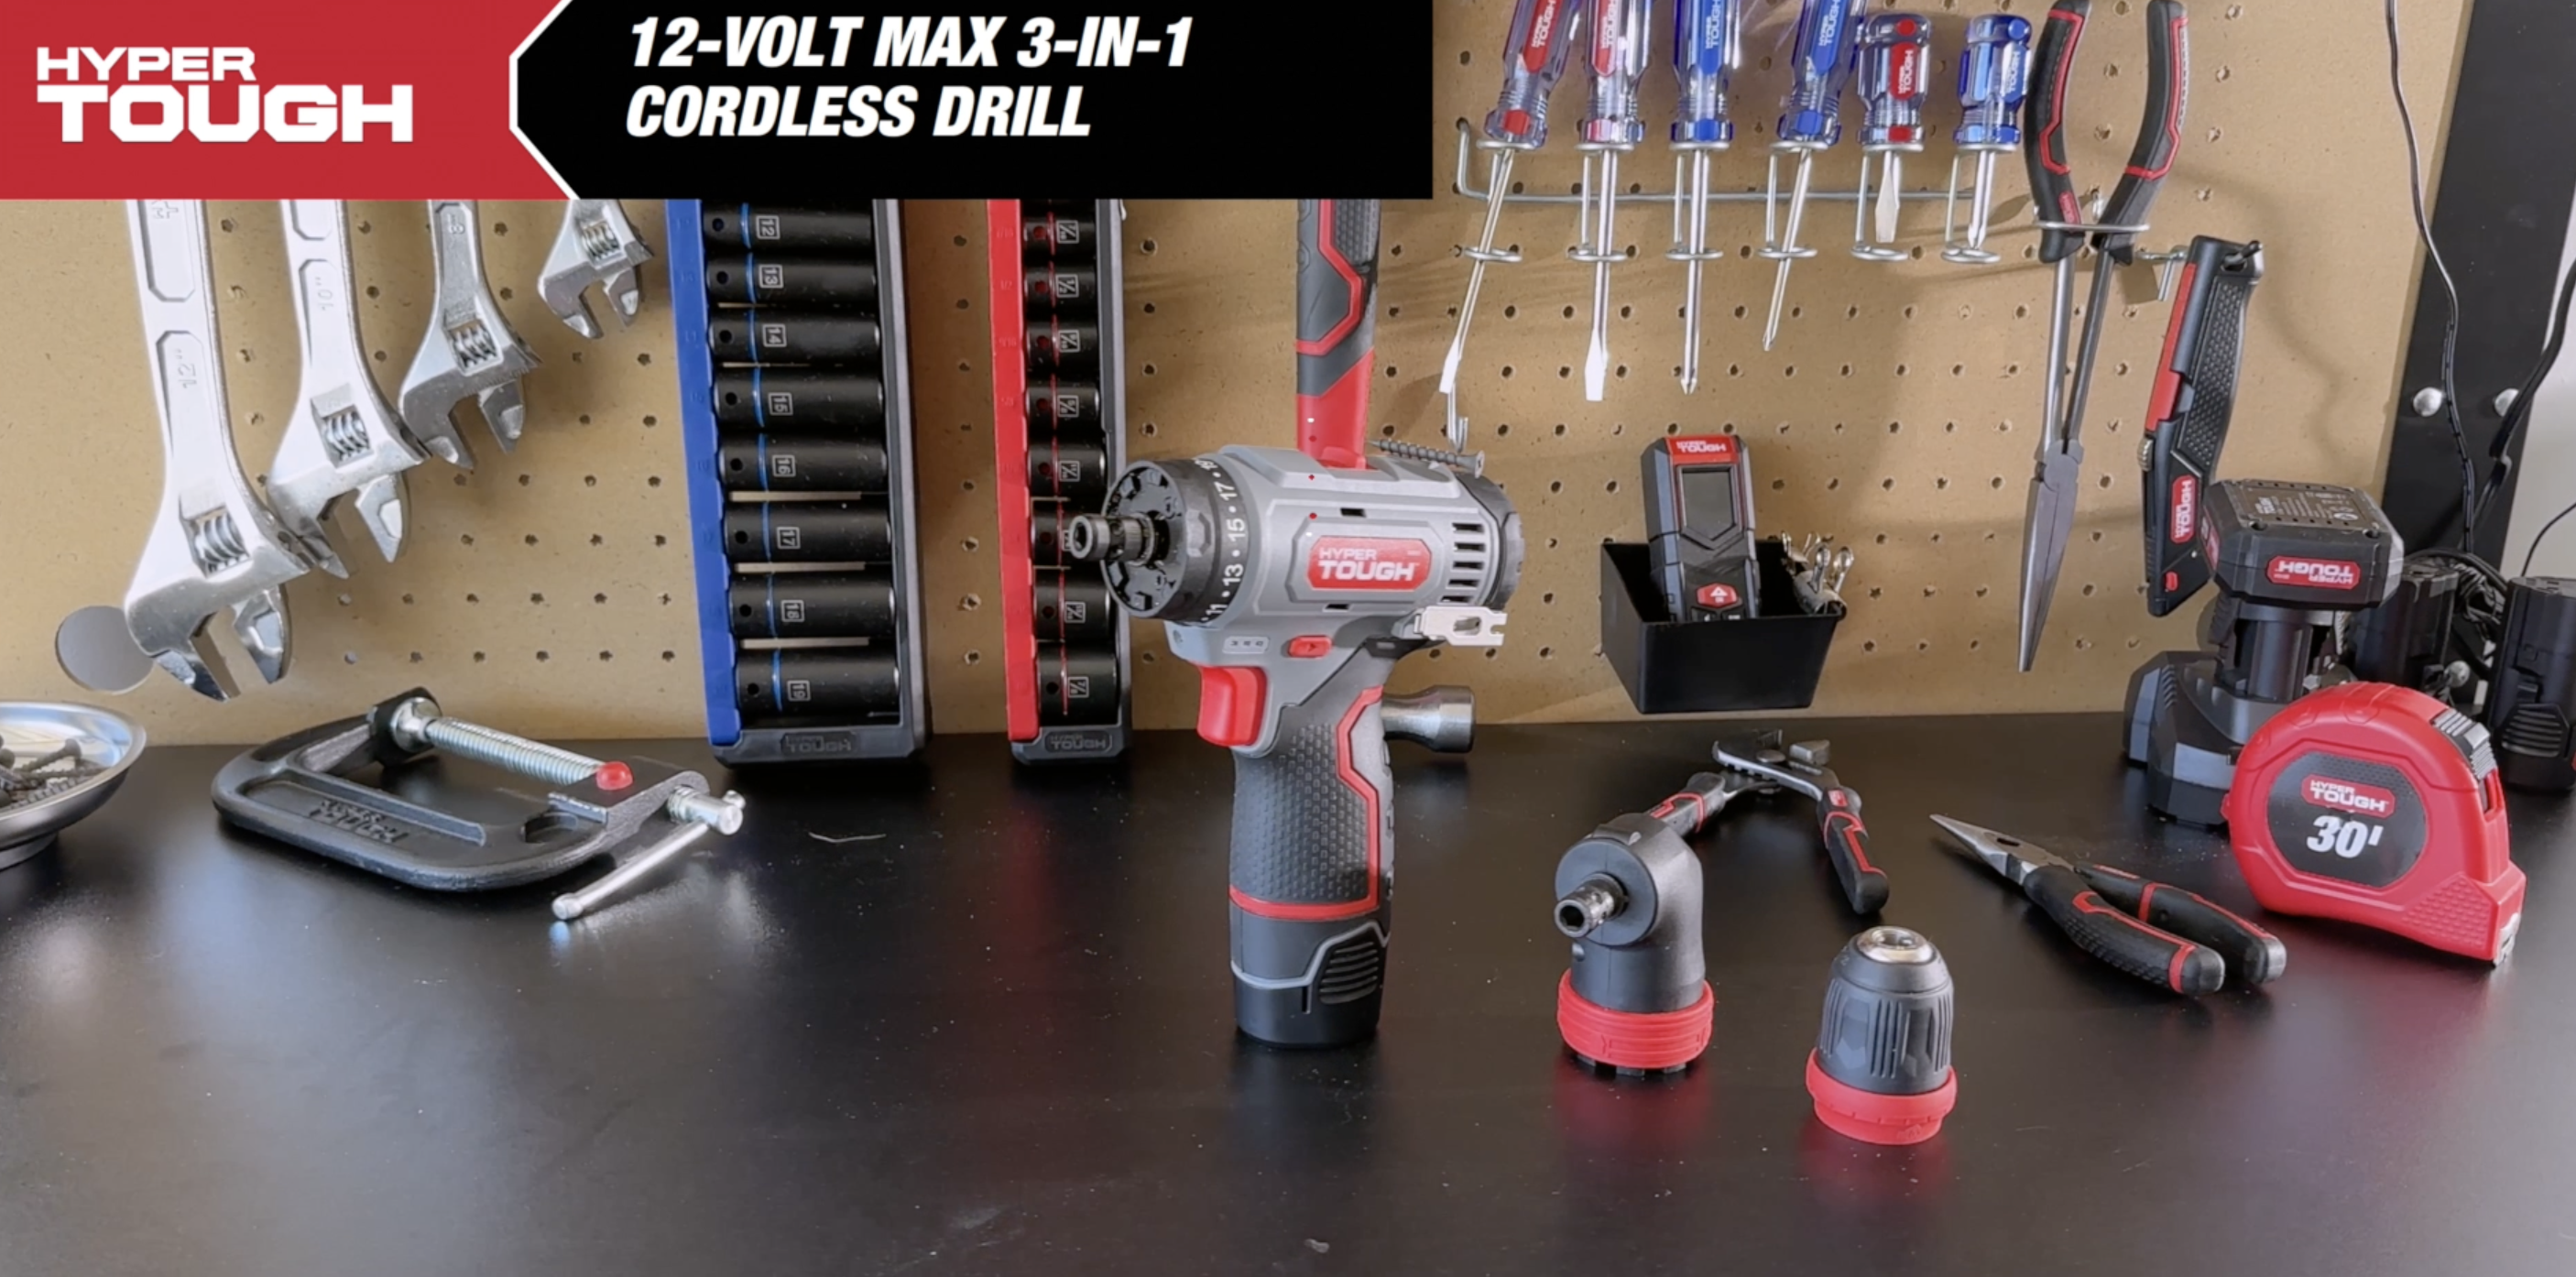 BLACK+DECKER 12-volt Max 3/8-in Keyless Cordless Drill (1-Battery Included,  Charger Included in the Drills department at